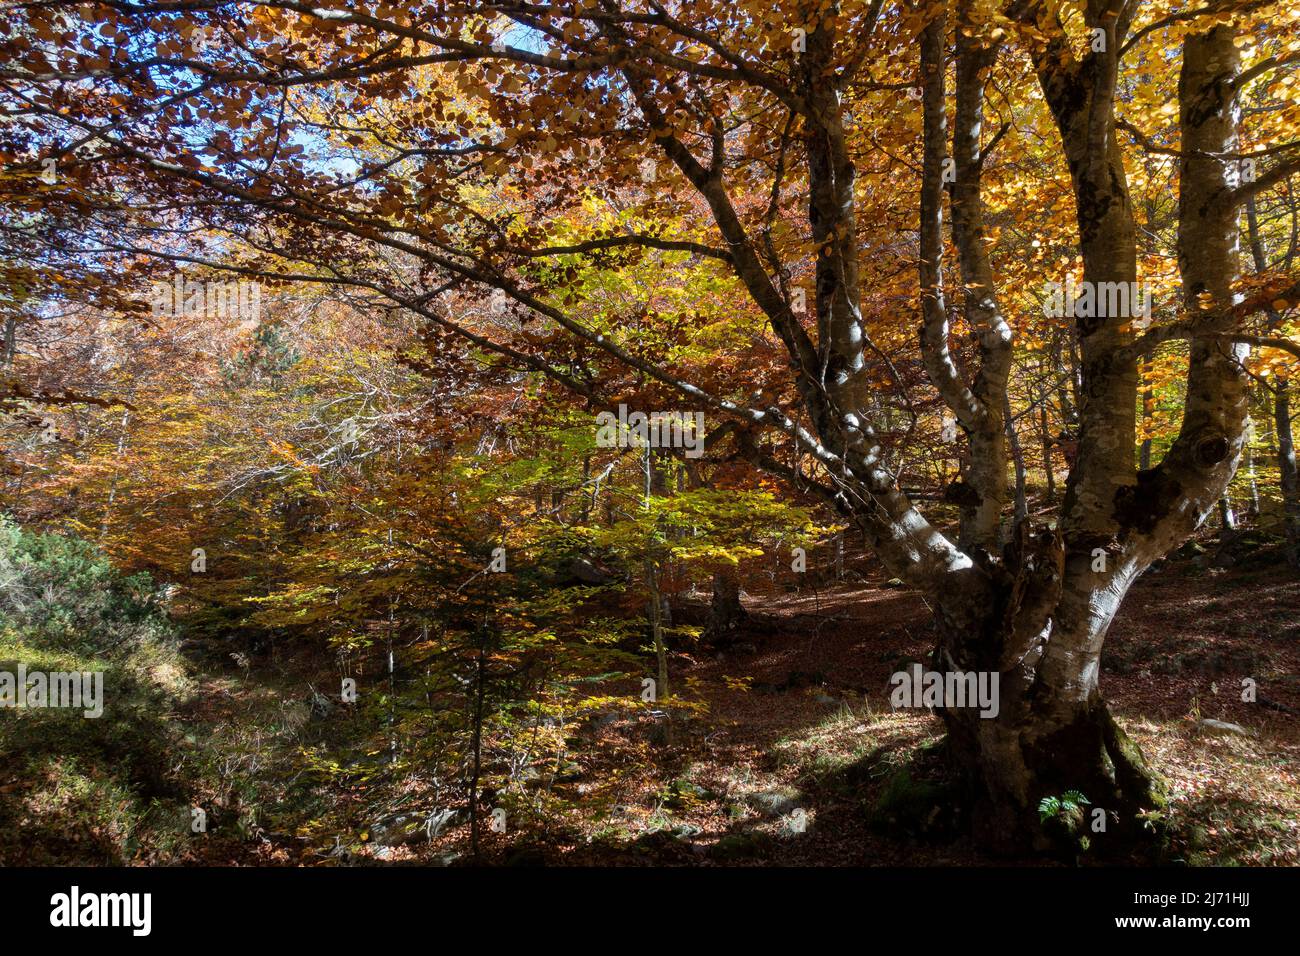 Salenques beech forest.Pyrenees.Aragon.Spain Foto Stock